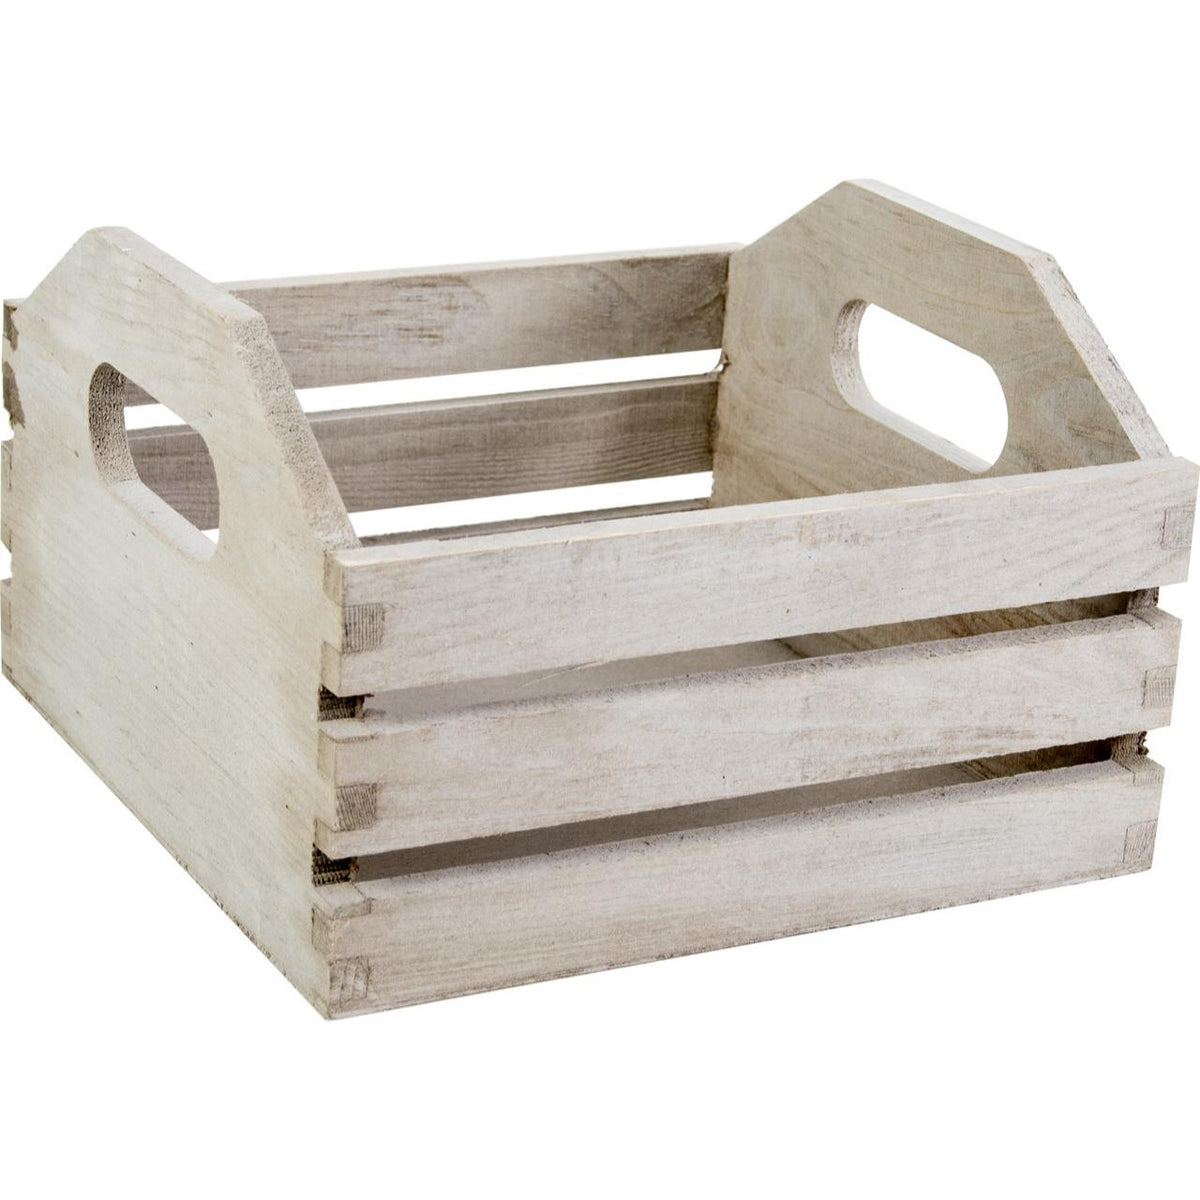 Wooden Crate with Handles